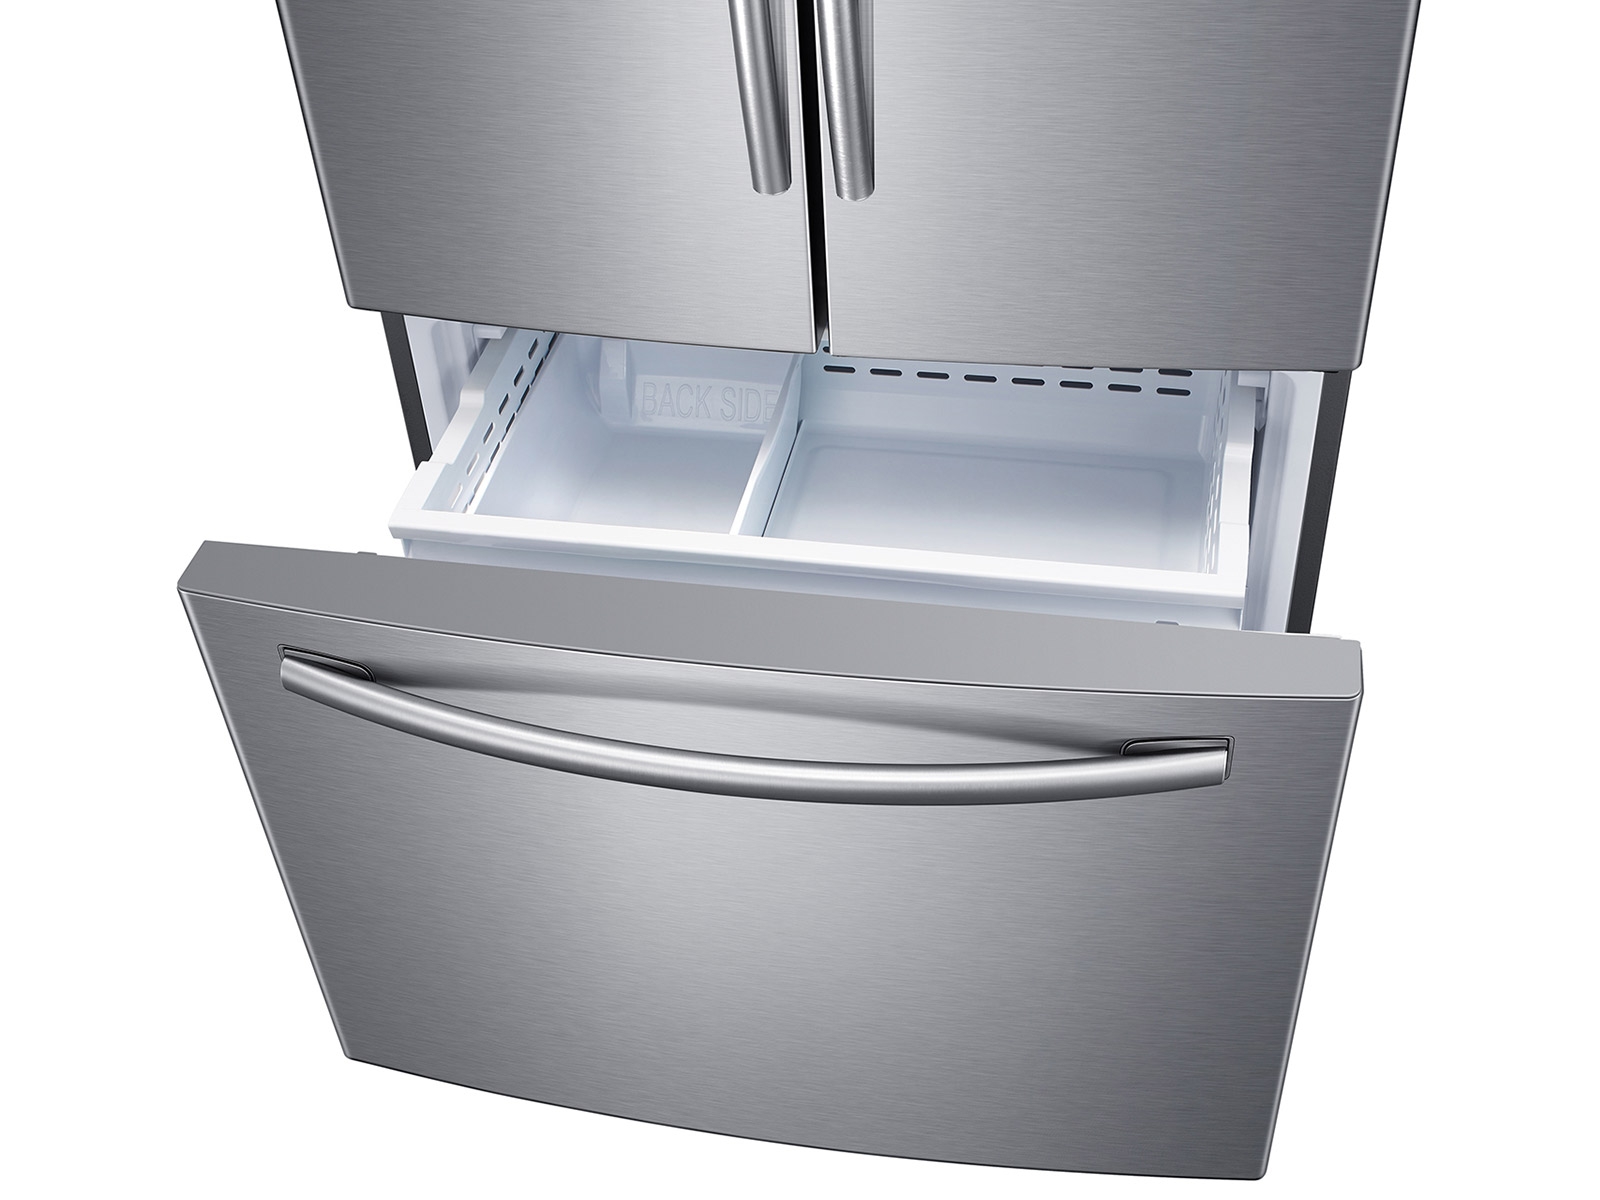 How to Fix Ice Dispenser Flap on Frigidaire Refrigerator: Quick Guide